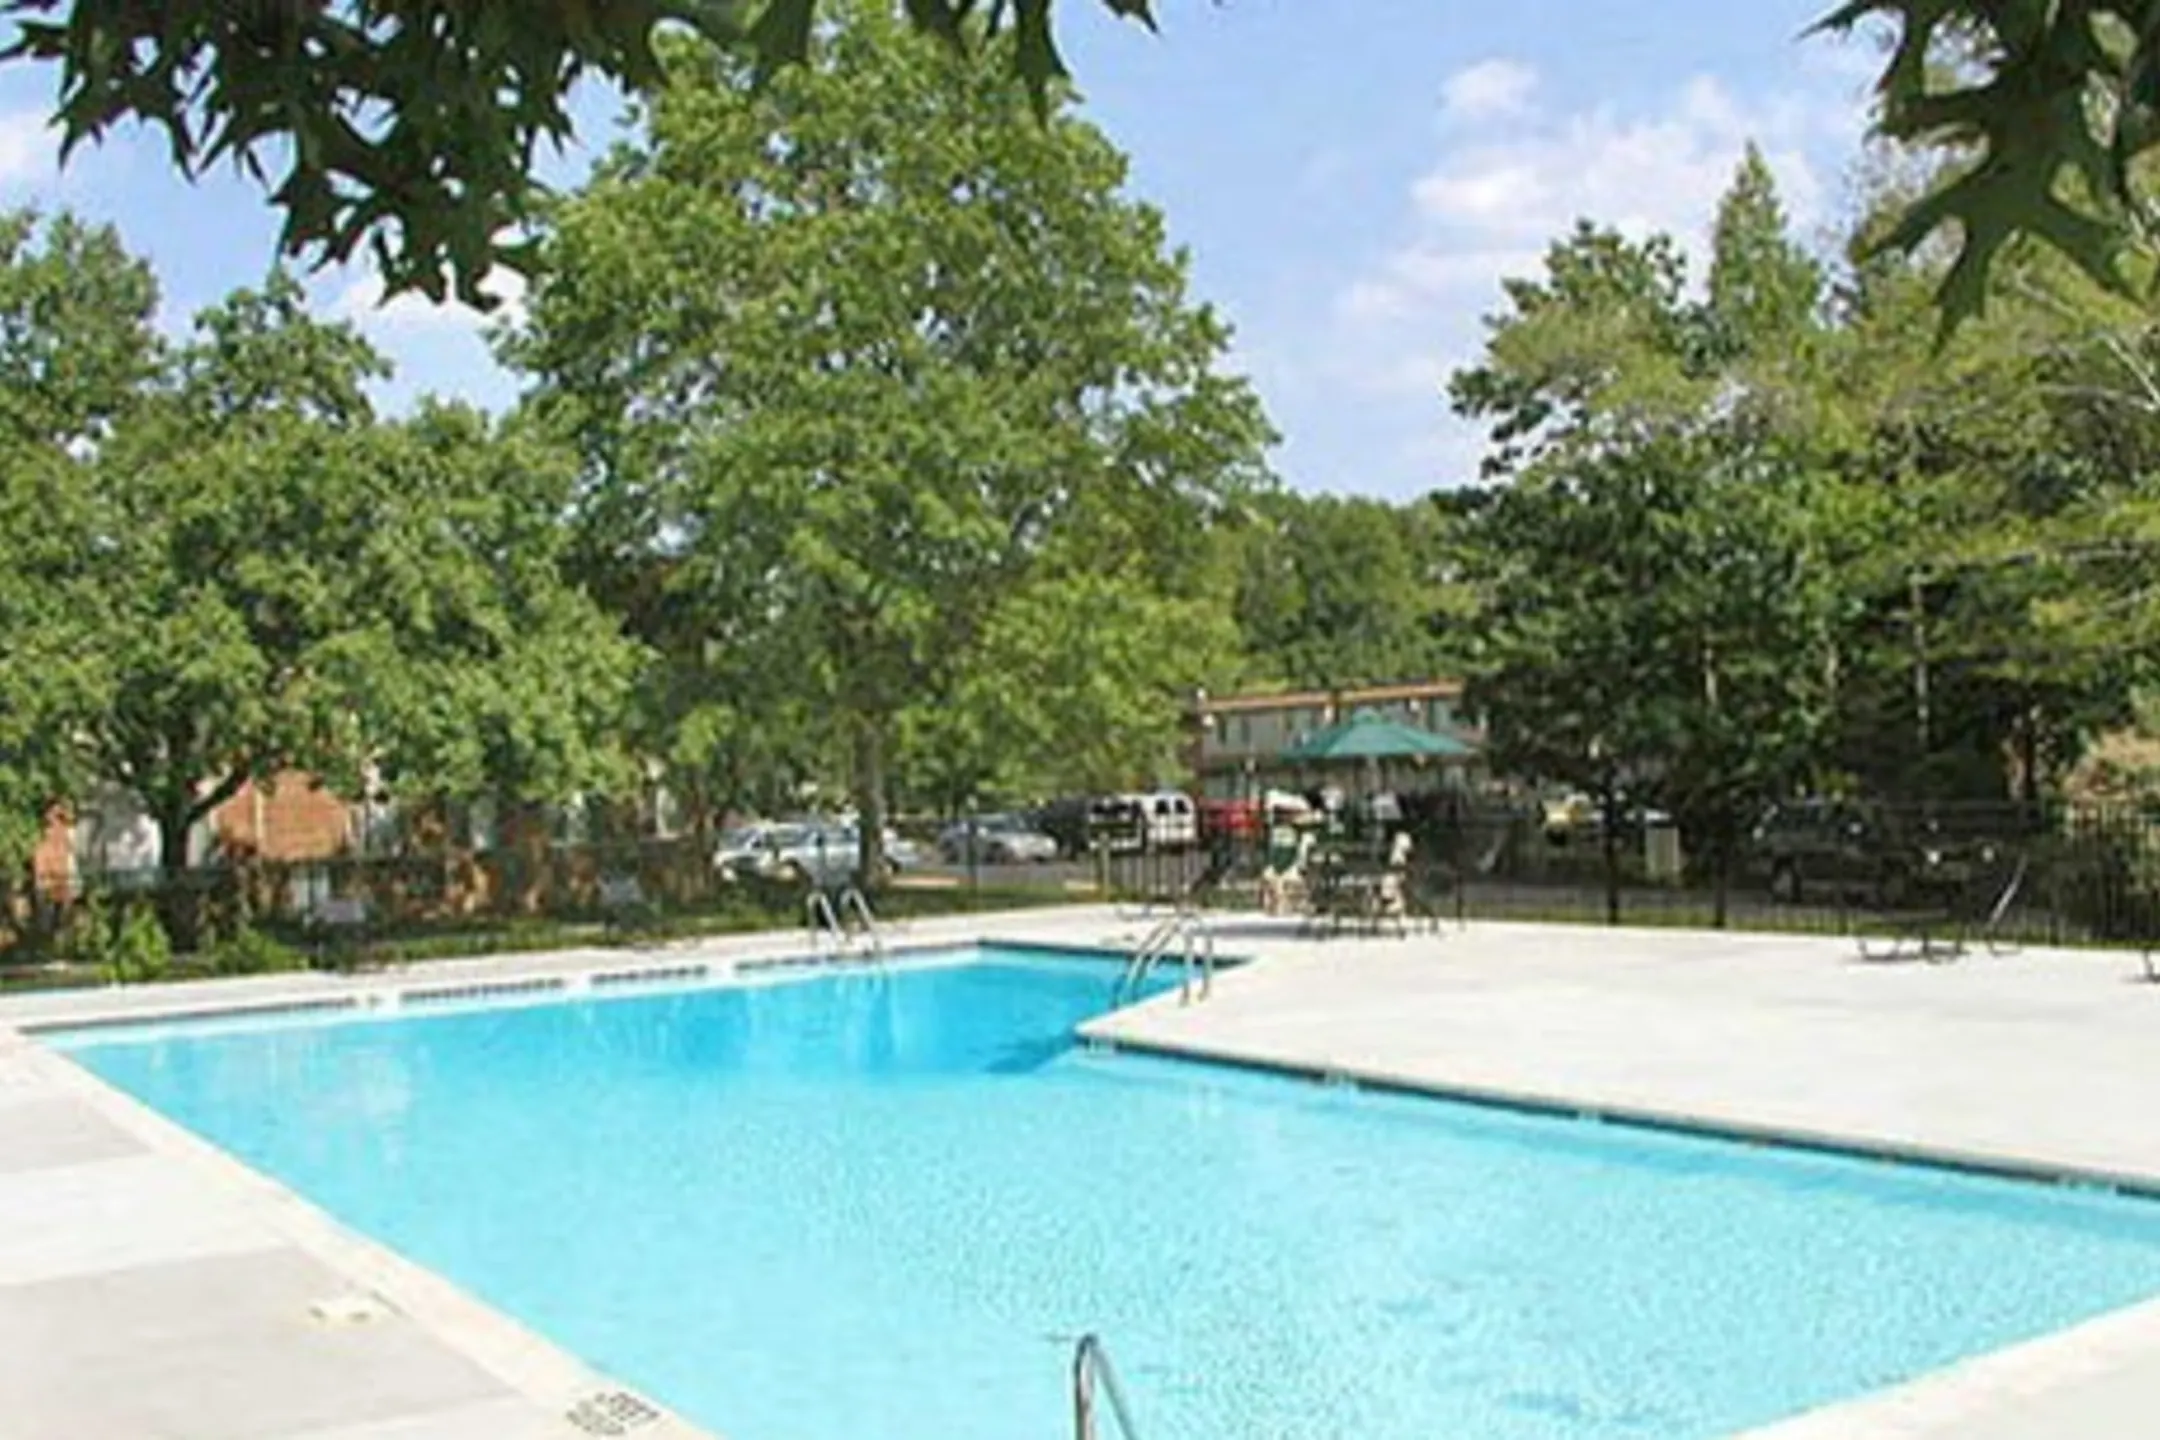 Pool - Castle Club Apartments - Morrisville, PA